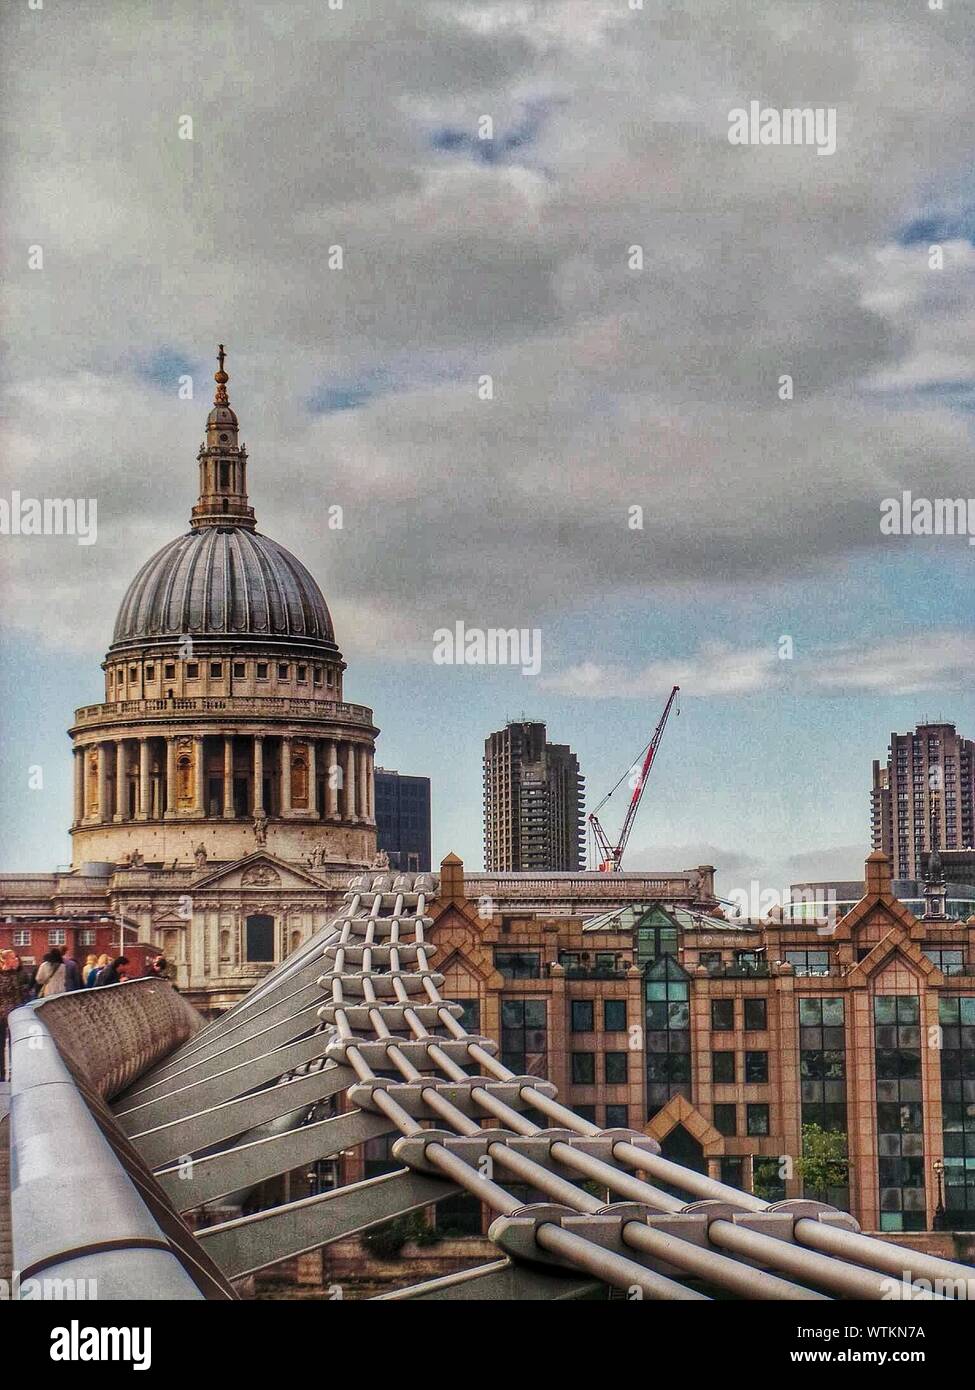 Dome Of St Pauls Cathedral Against Cloudy Sky Stock Photo